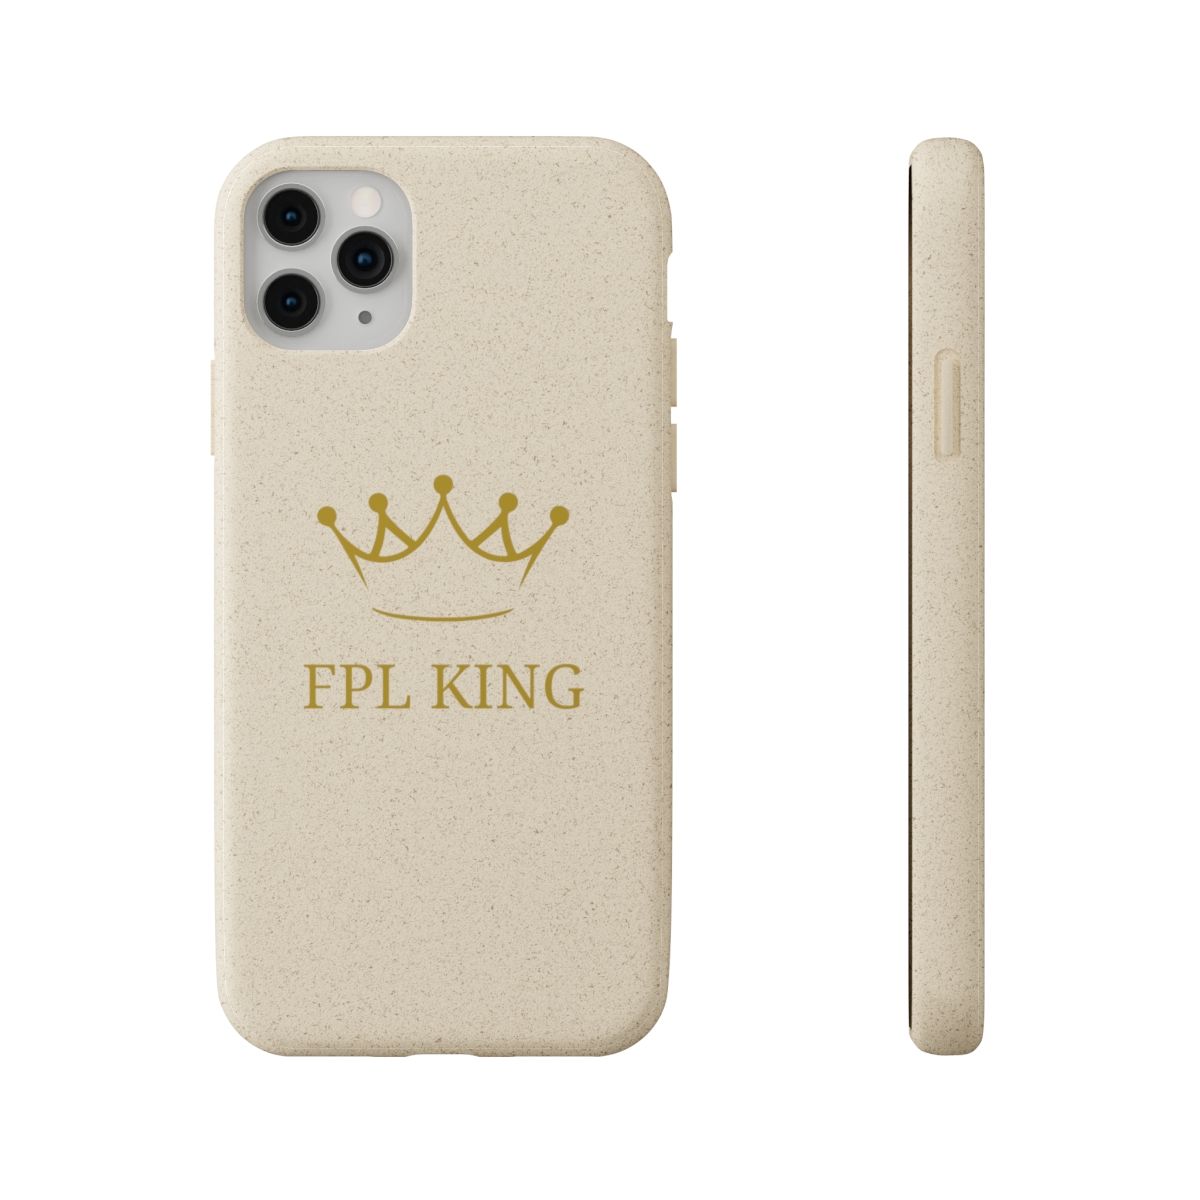 Eco-friendly FPL King iPhone Case